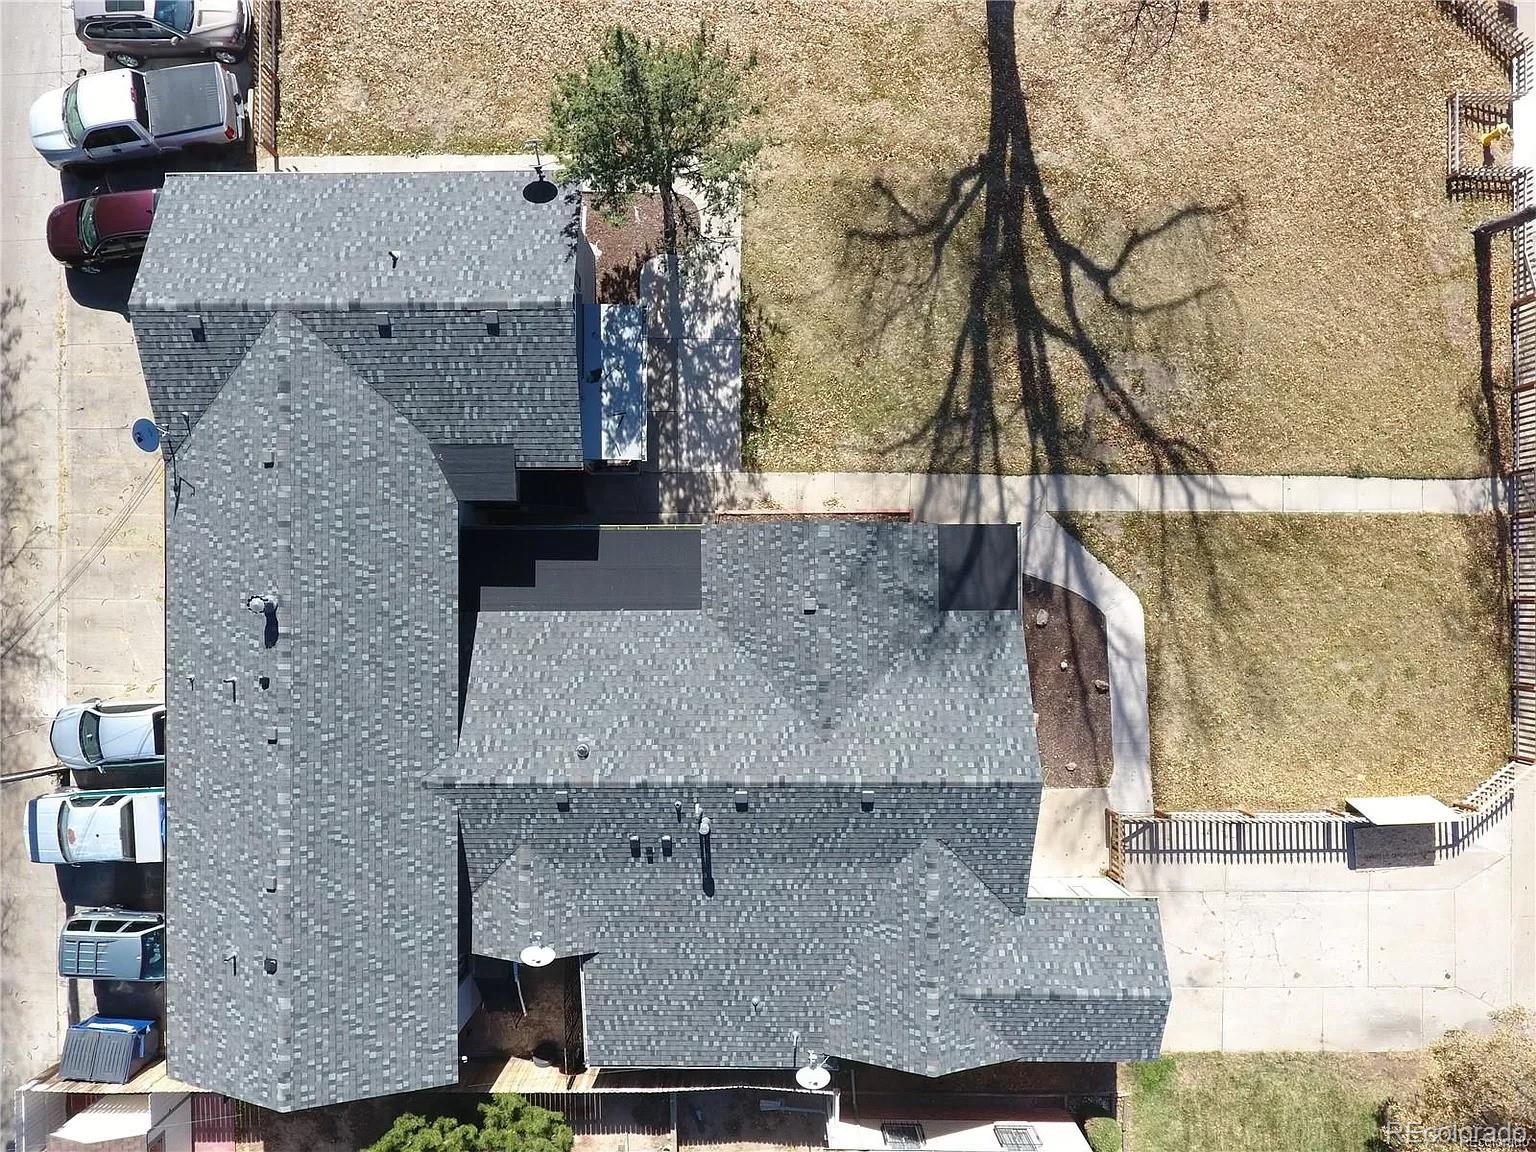 an aerial view of a house with a yard and large tree